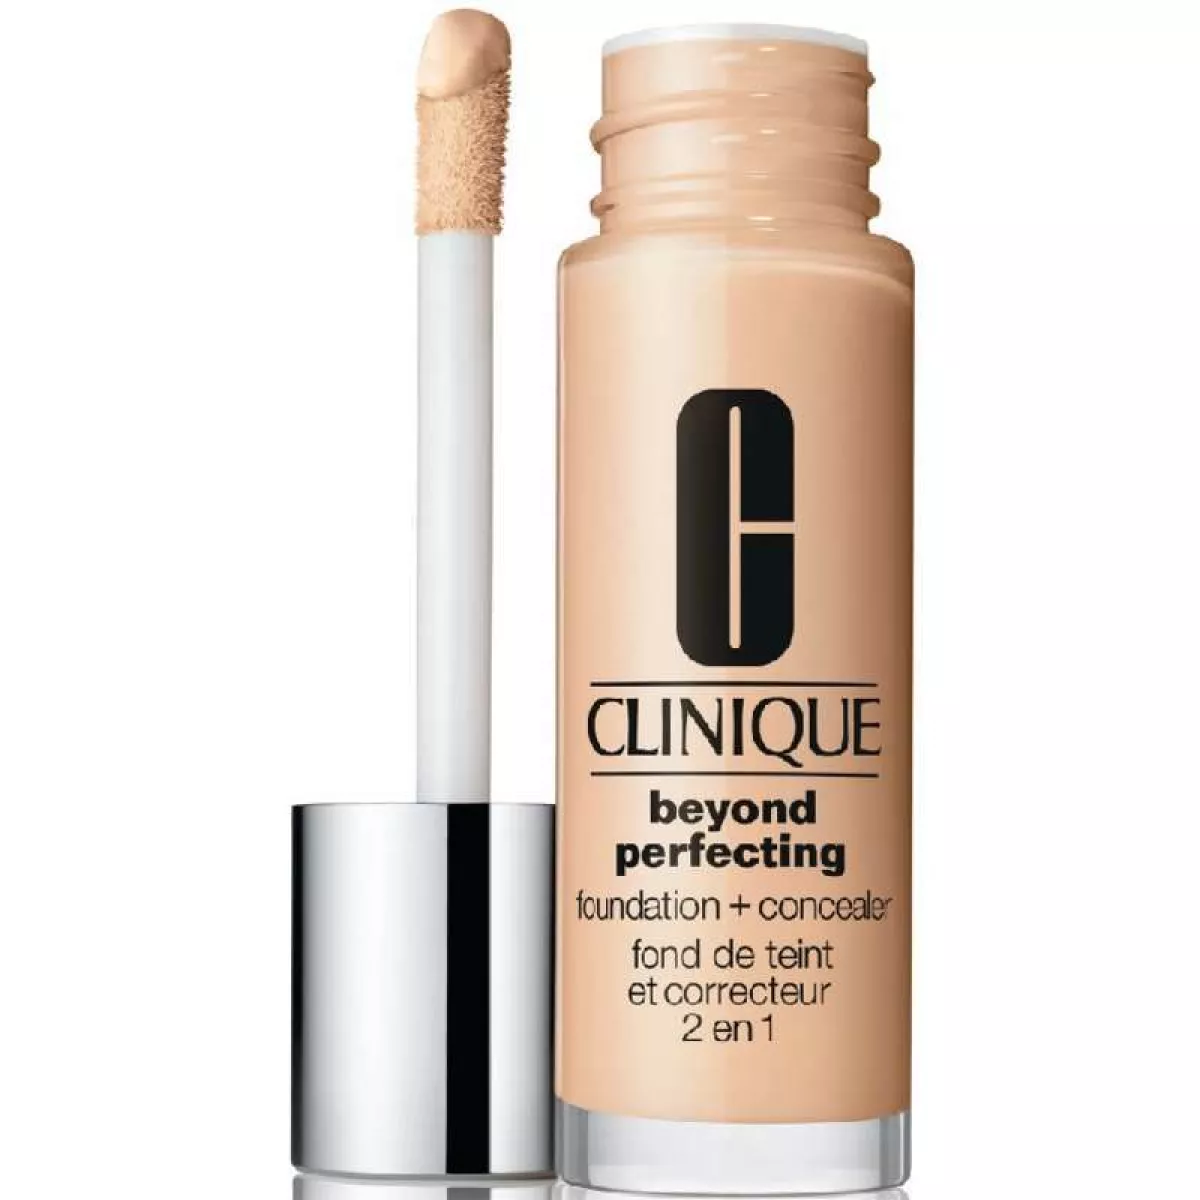 #3 - Clinique Beyond Perfecting Foundation + Concealer 30 ml - Alabaster